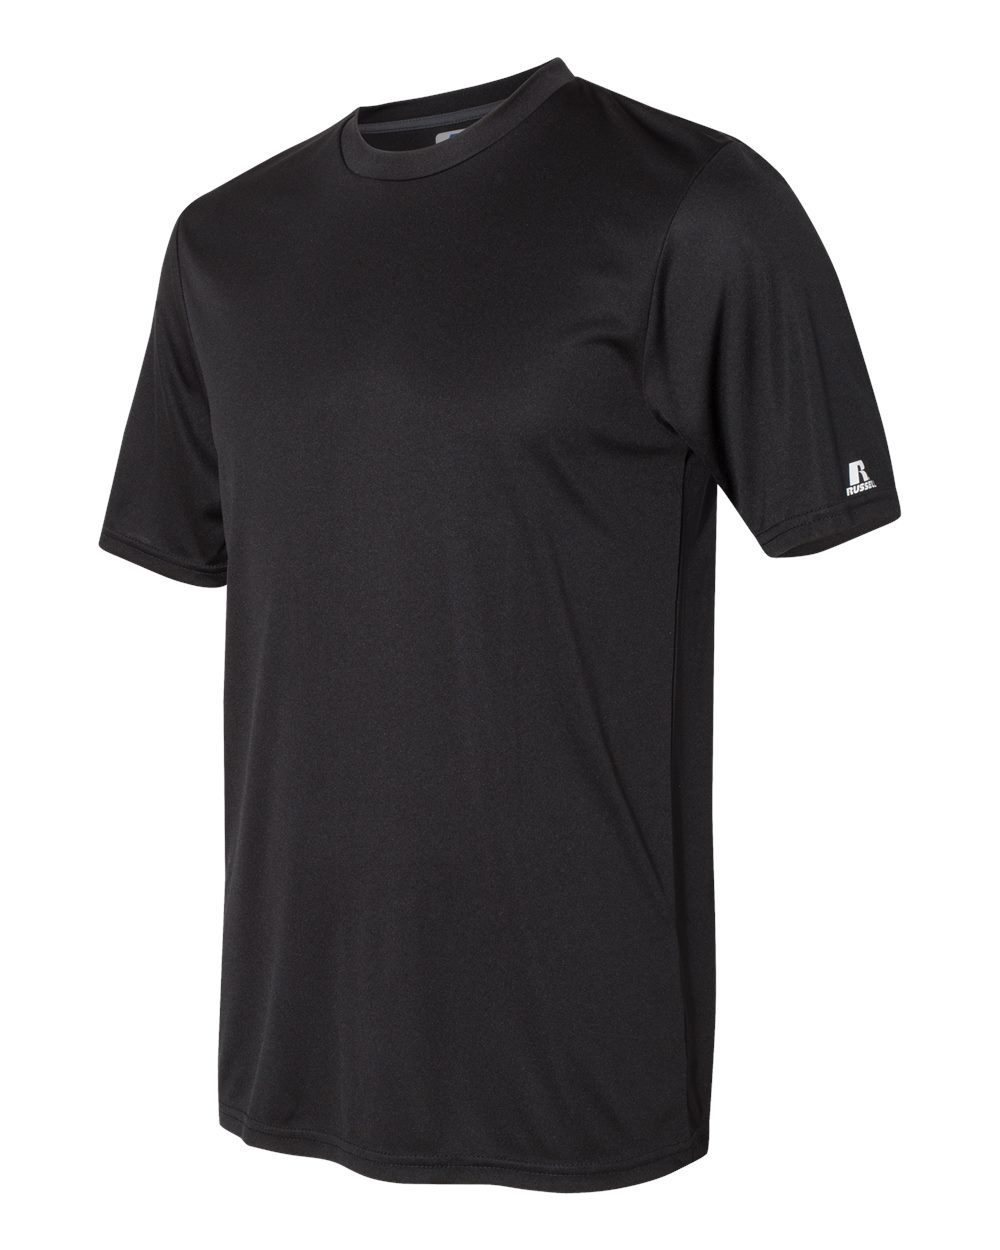 Russell Athletic 629X2M - Core Short Sleeve Performance Tee